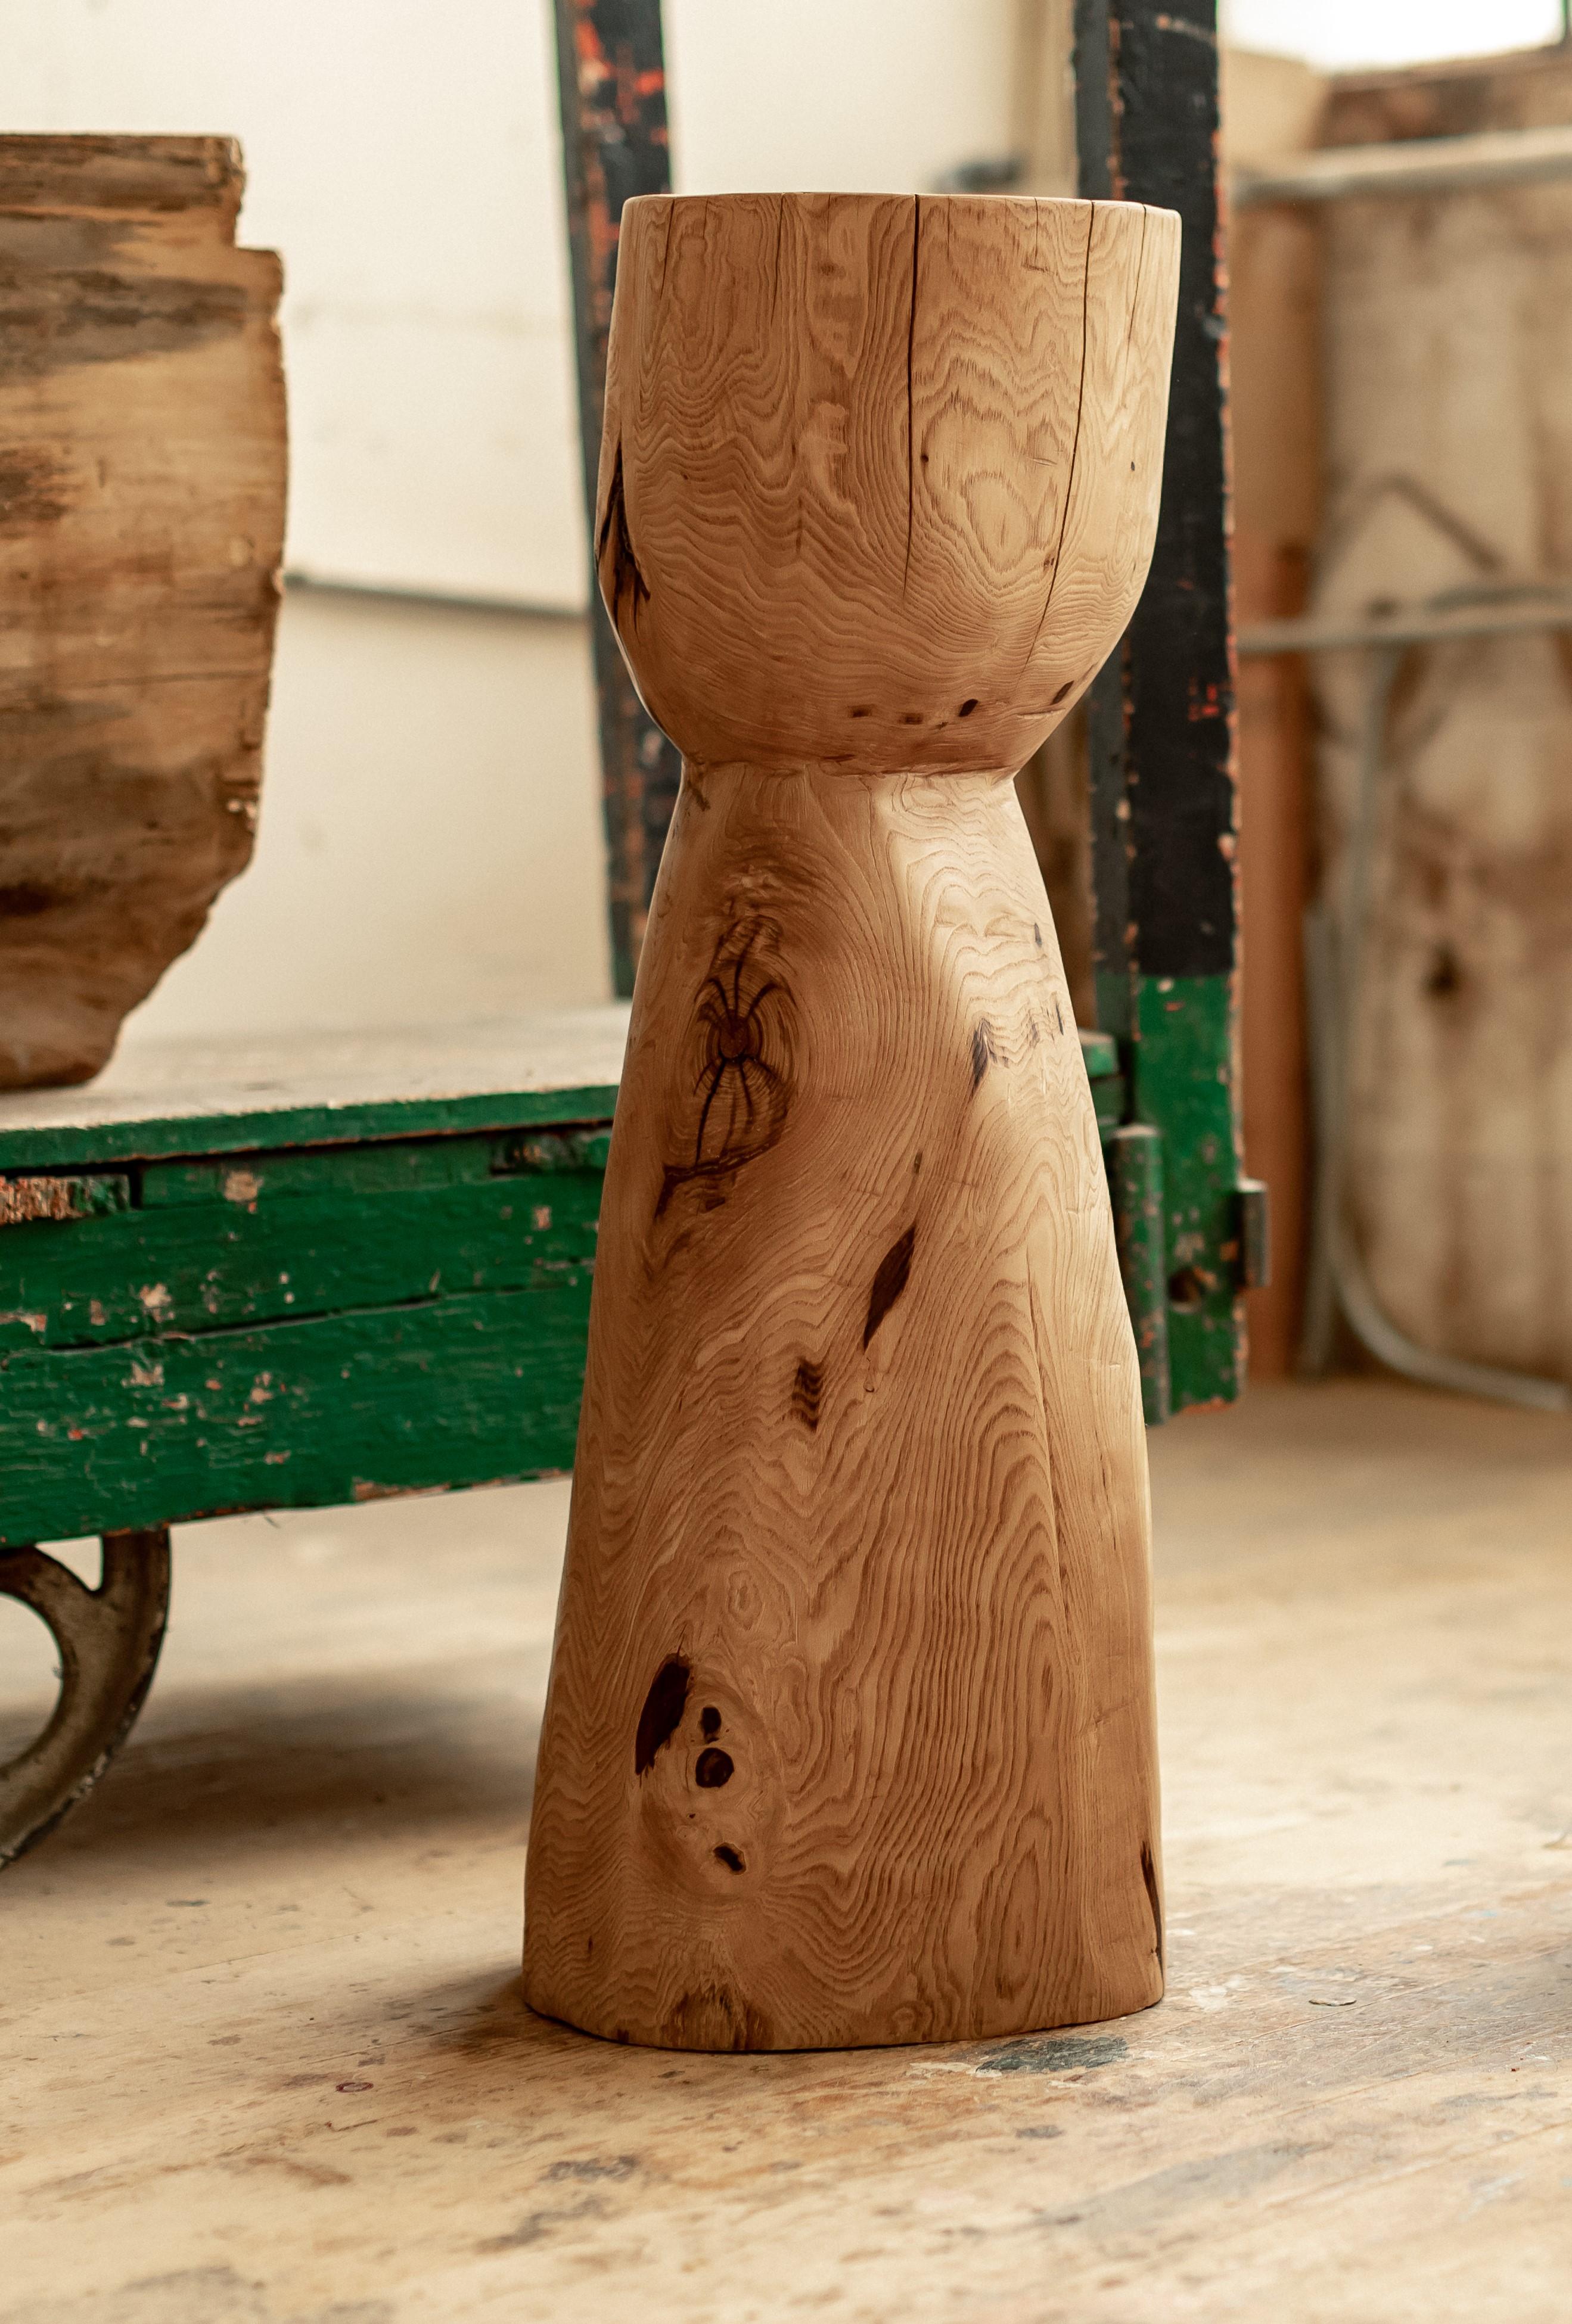 Hourglass sculpted by Vince Skelly
Dimensions: H 81 x D 30 cm
Materials: Oak

All of his works are hand-sculpted by Vince Skelly from a single Block, thus the item will be slightly different from the one in pictures.

Vince Skelly is attracted